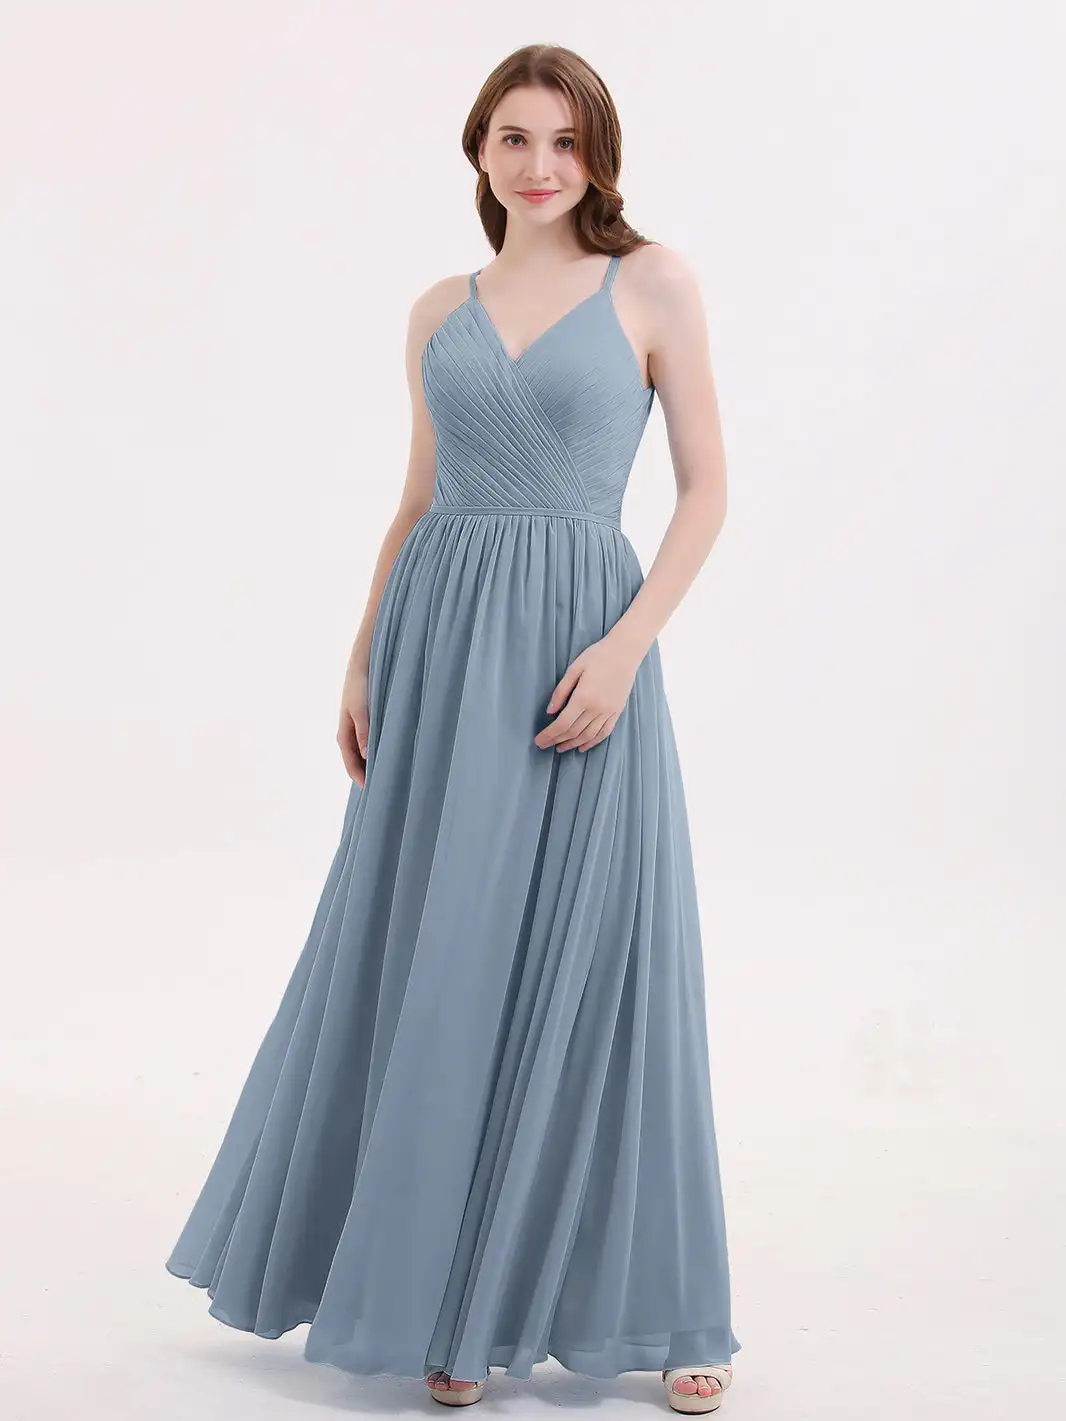 

Open Back Chiffon Dress With V Neck Bridesmaid Dress Spaghetti Straps Wedding Cocktail Dresses With Slit Pleated Evening Gowns